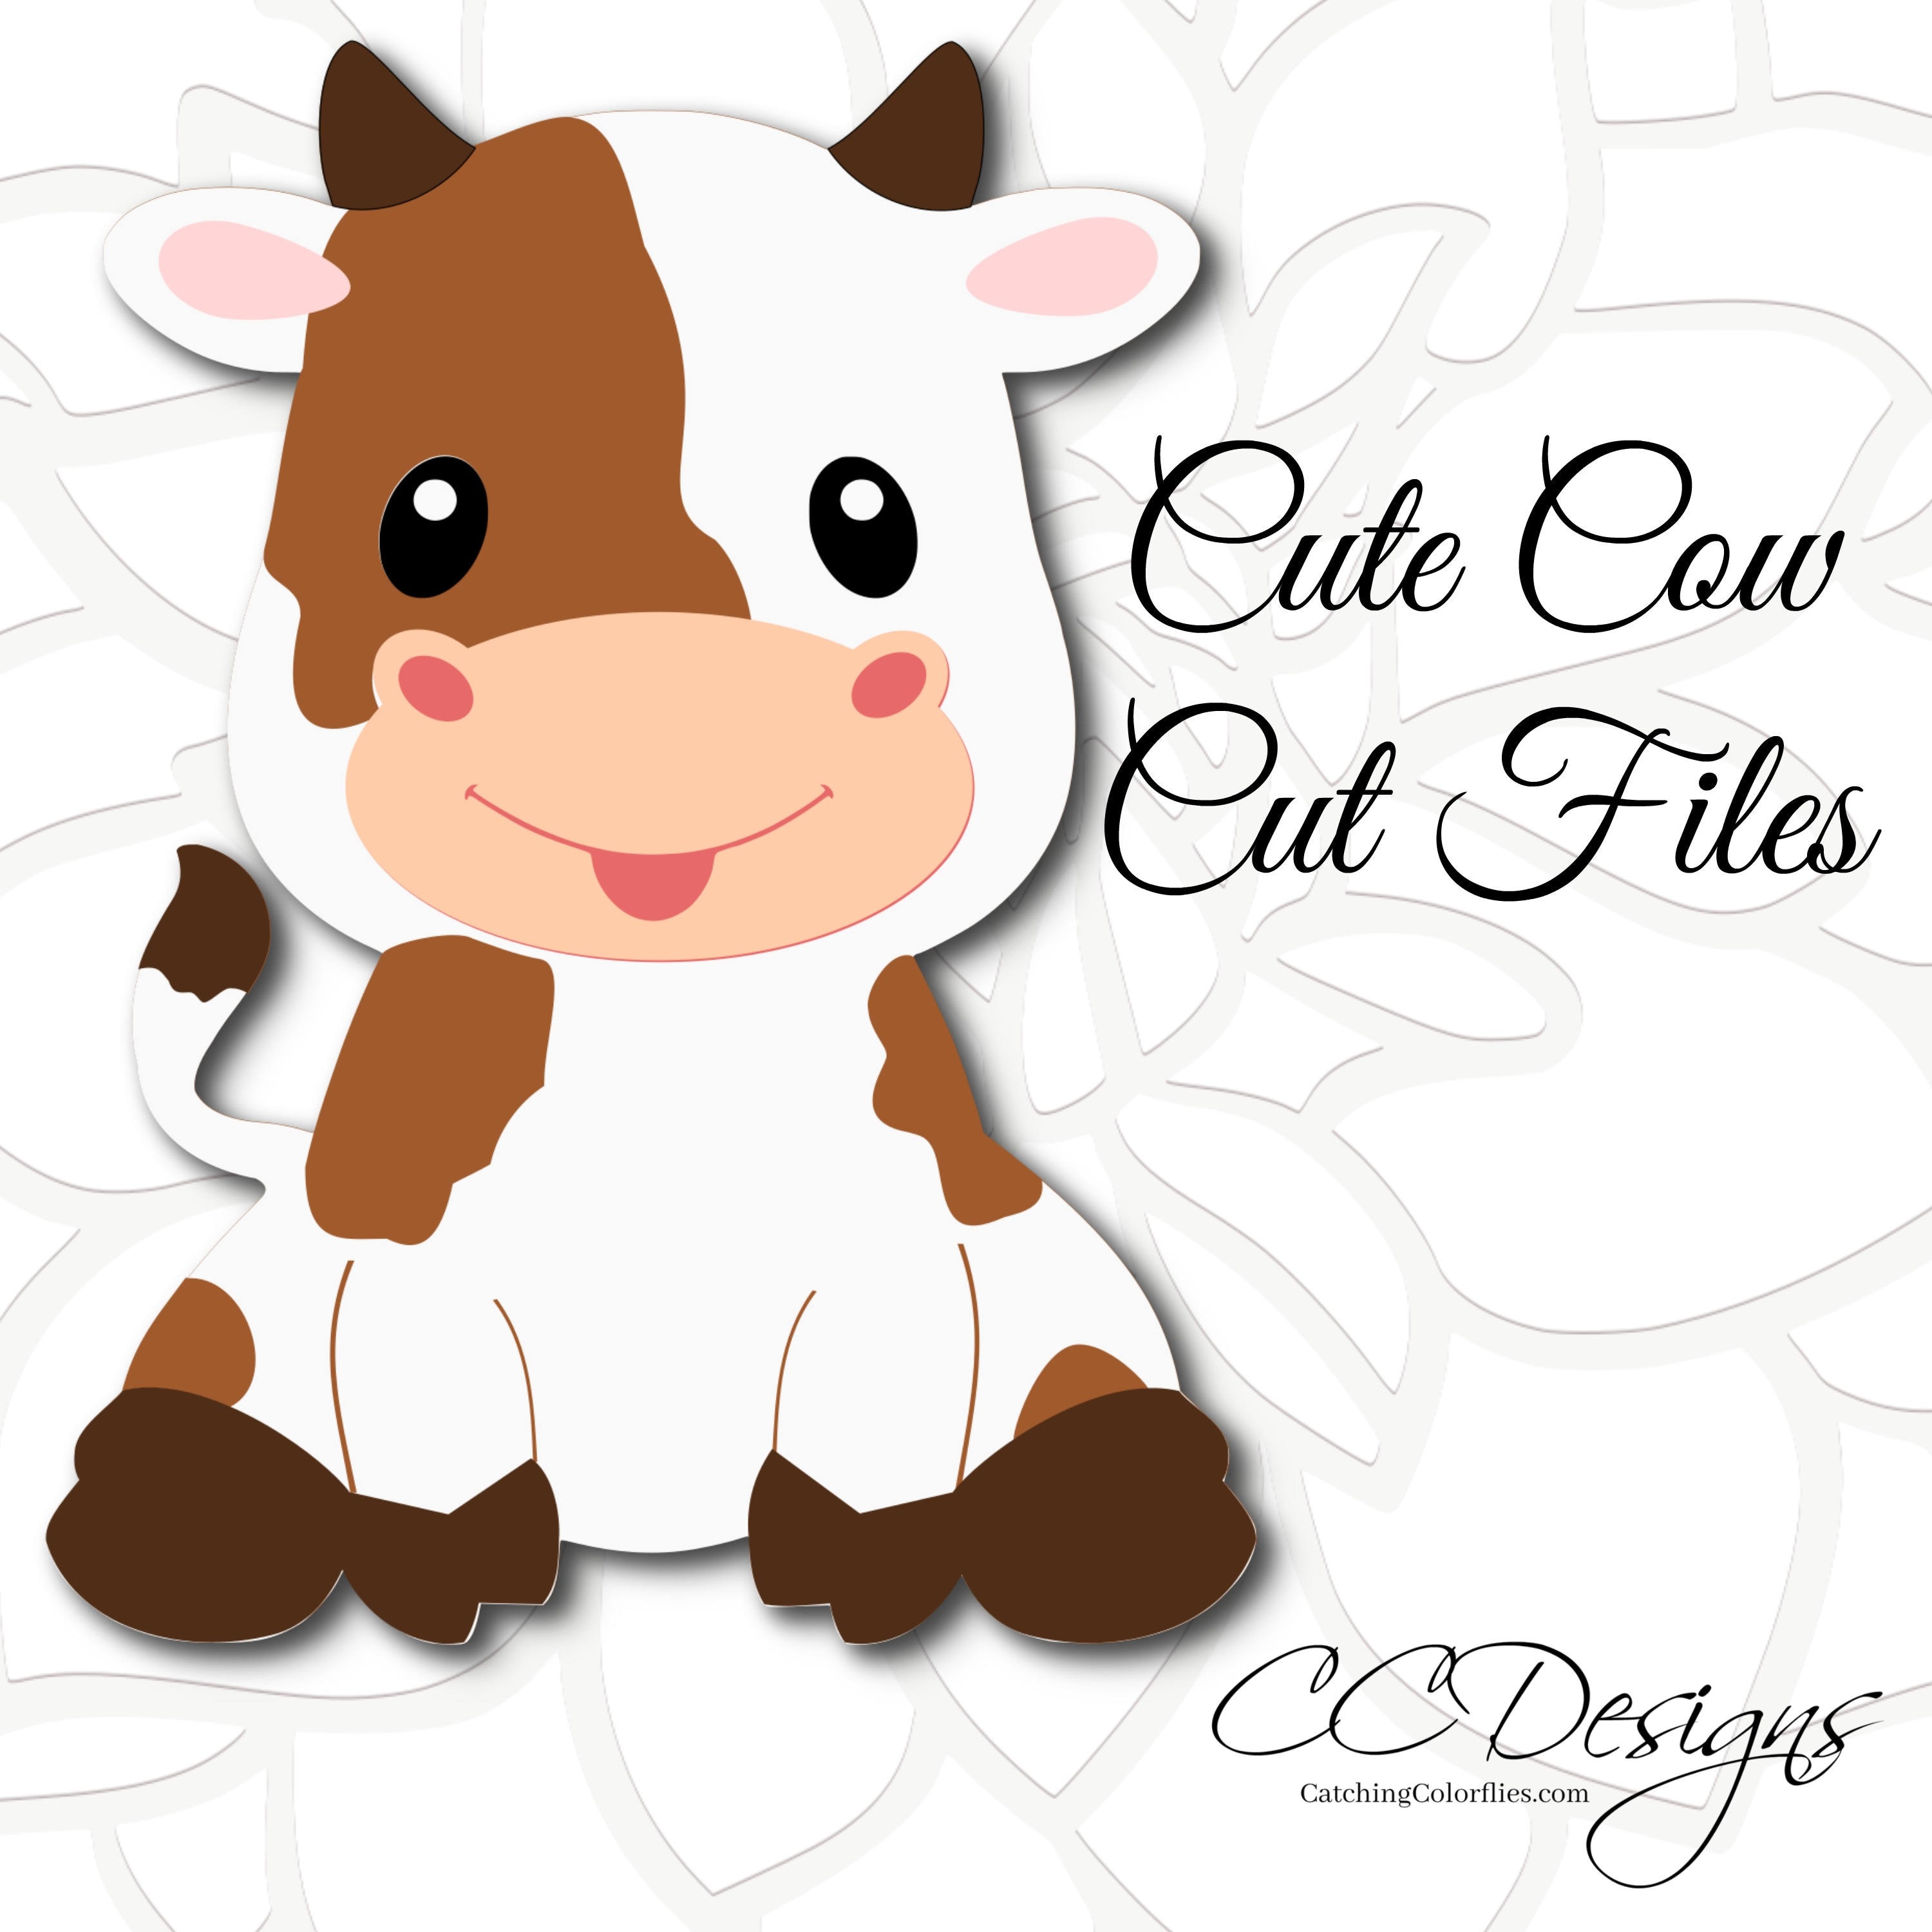 Download Cute Cow Svg - Free SVG Cut File - Best Free Fonts Design For Your Next Design Project